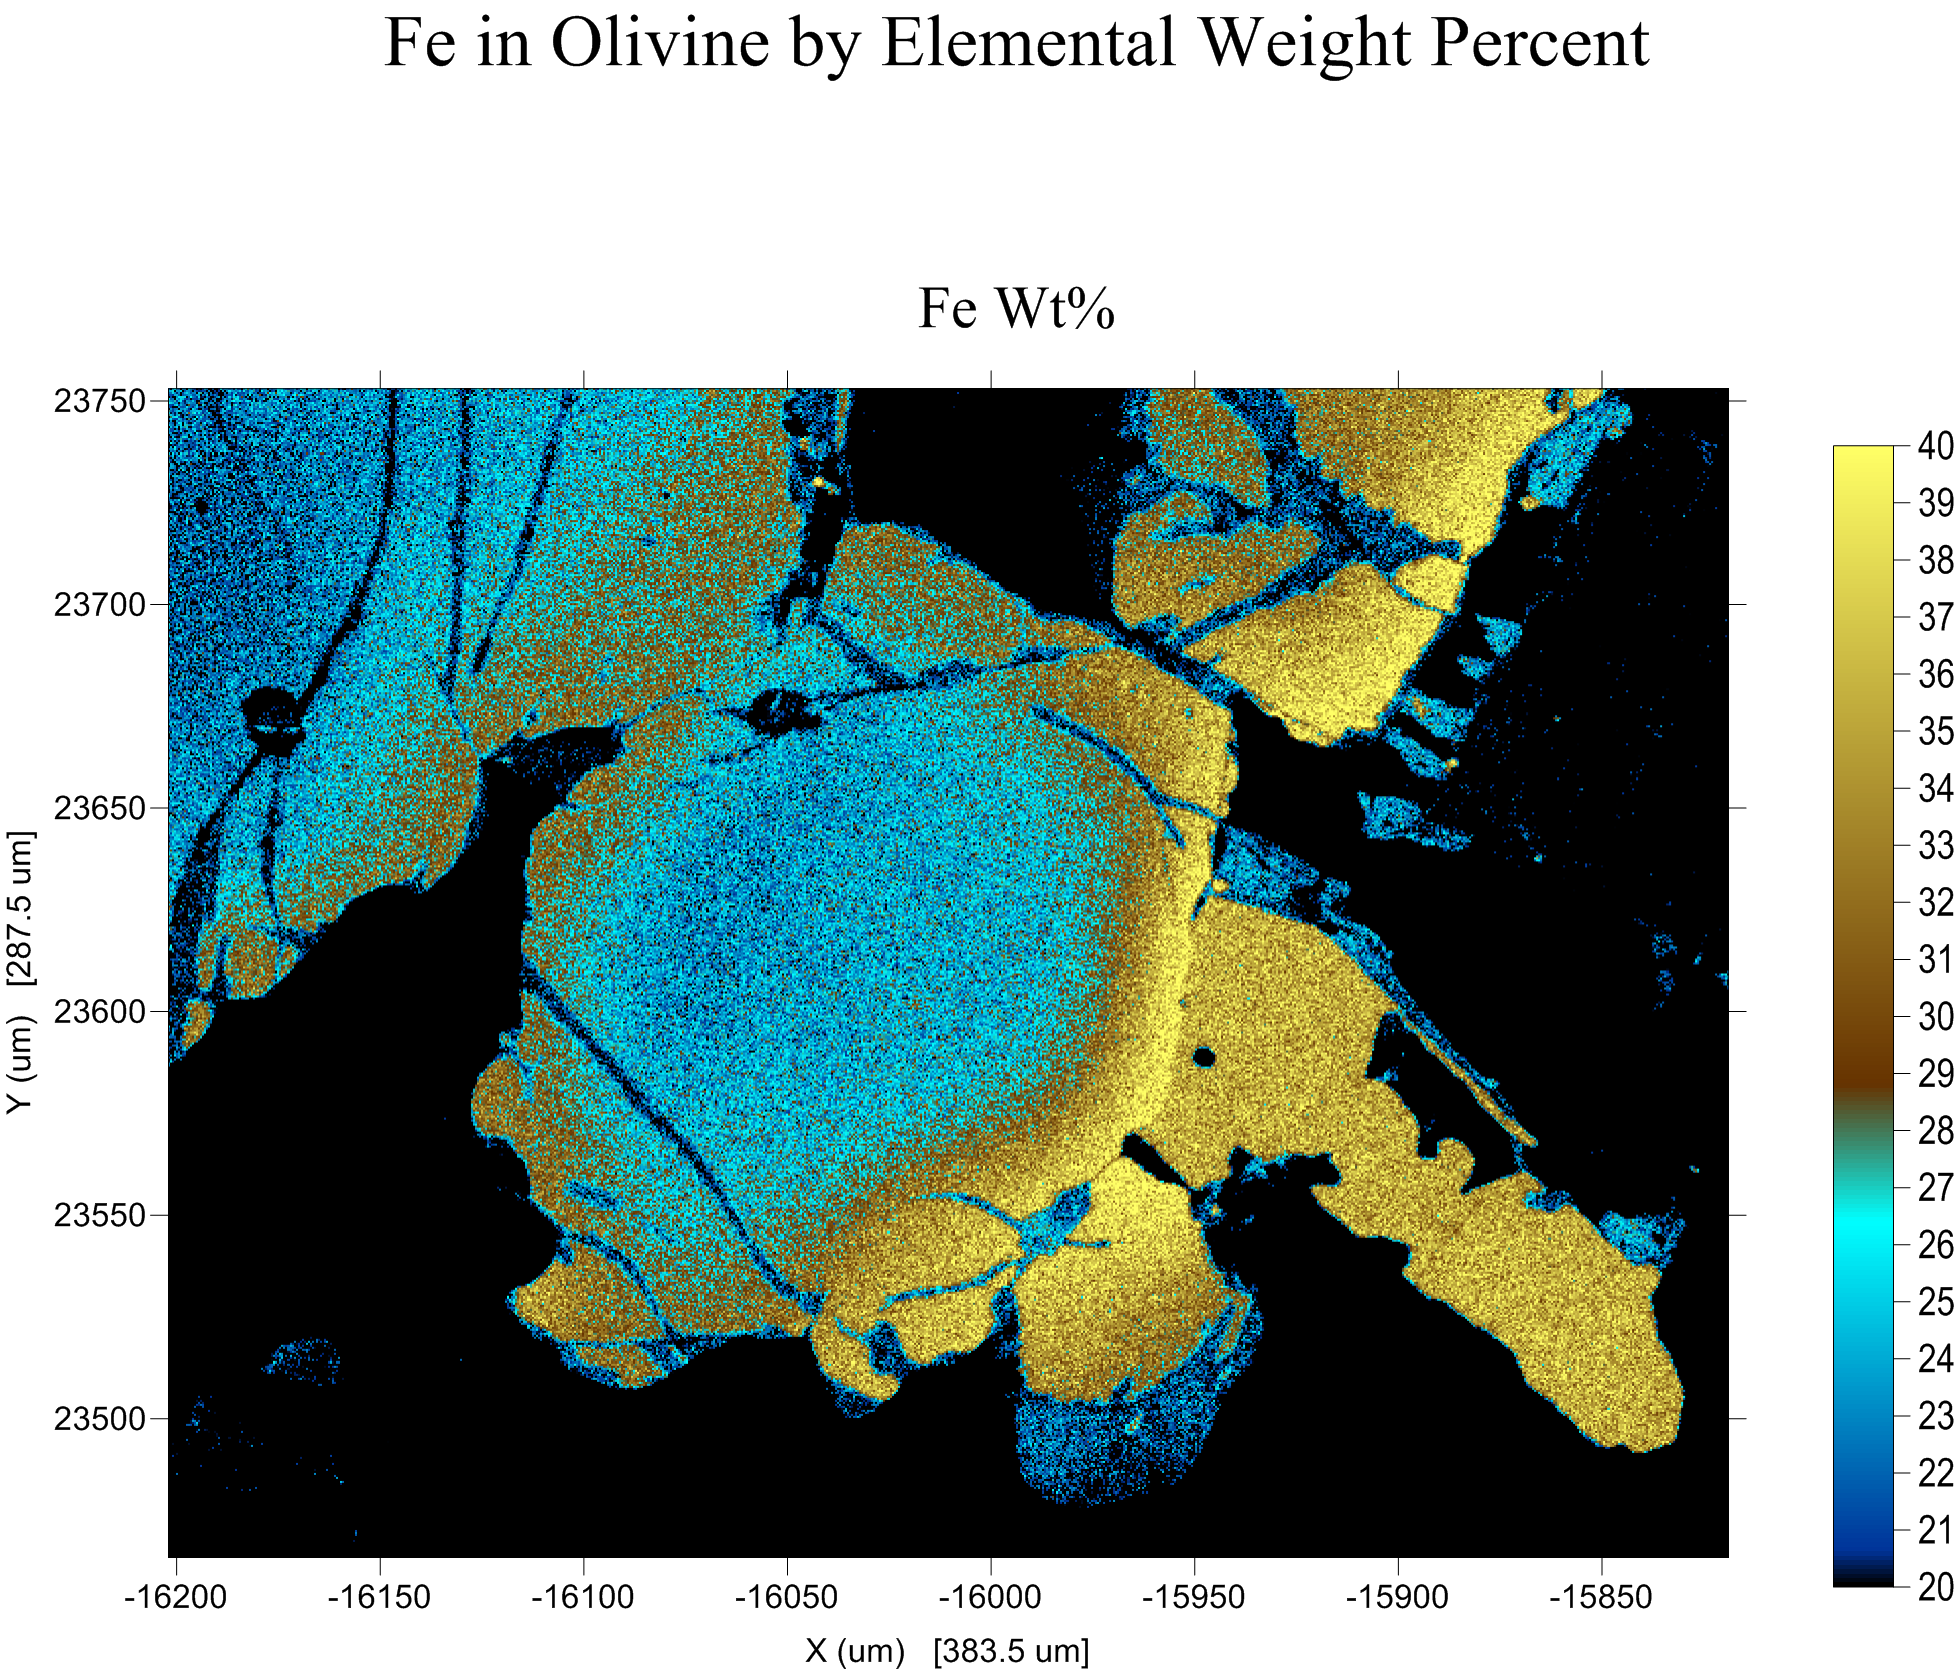 Fe in olivine by elemental weight percent